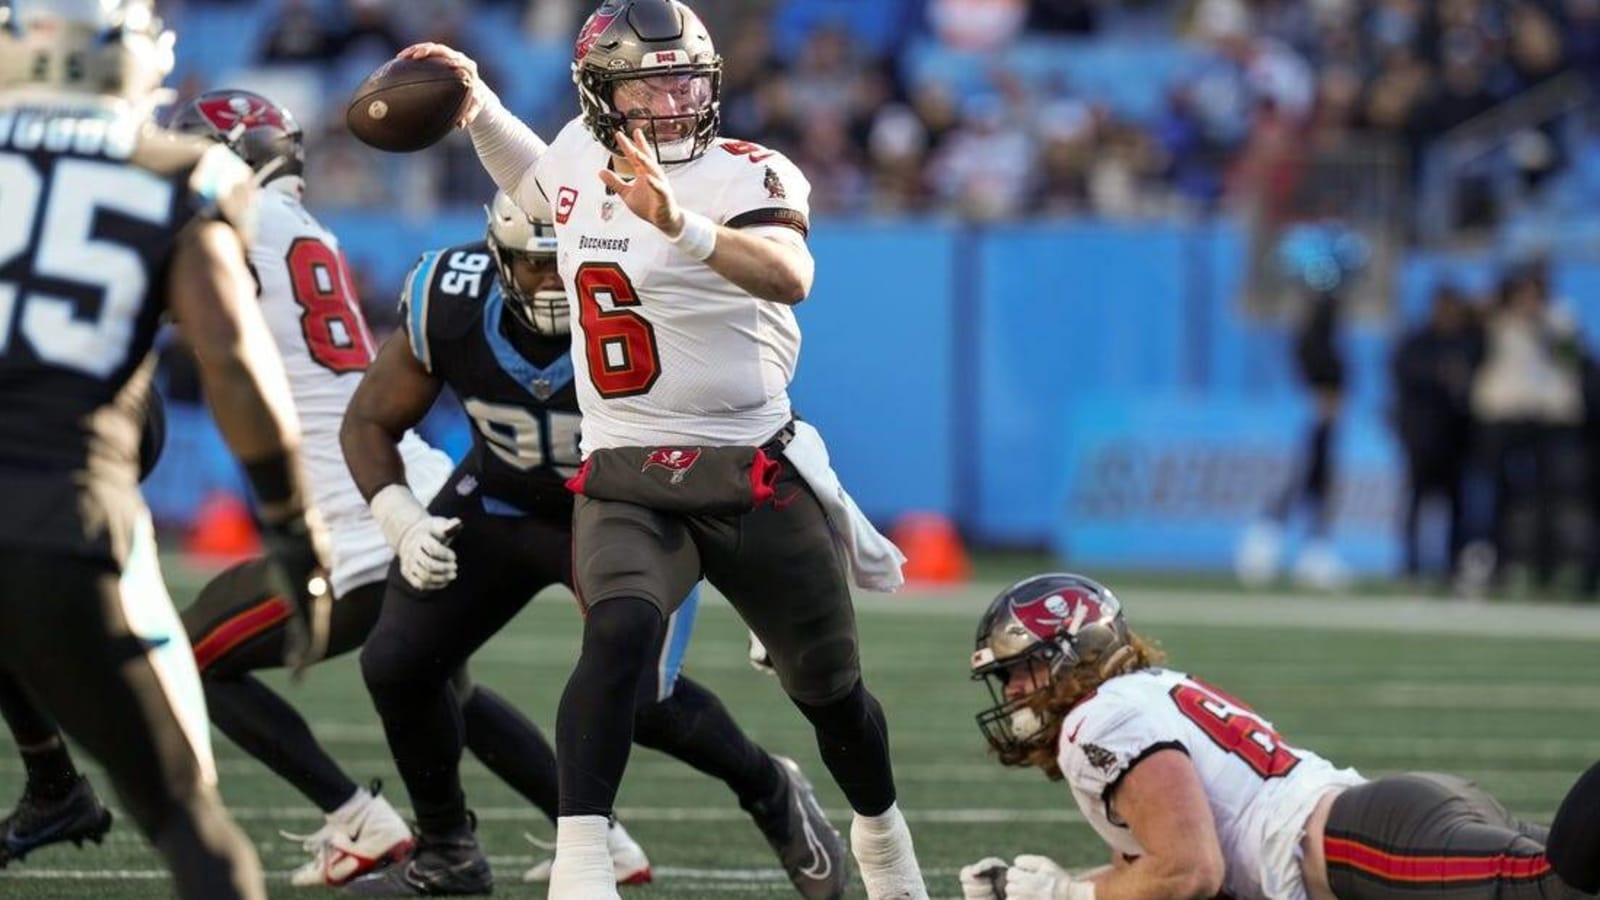 Bucs, Eagles take different paths to playoff matchup